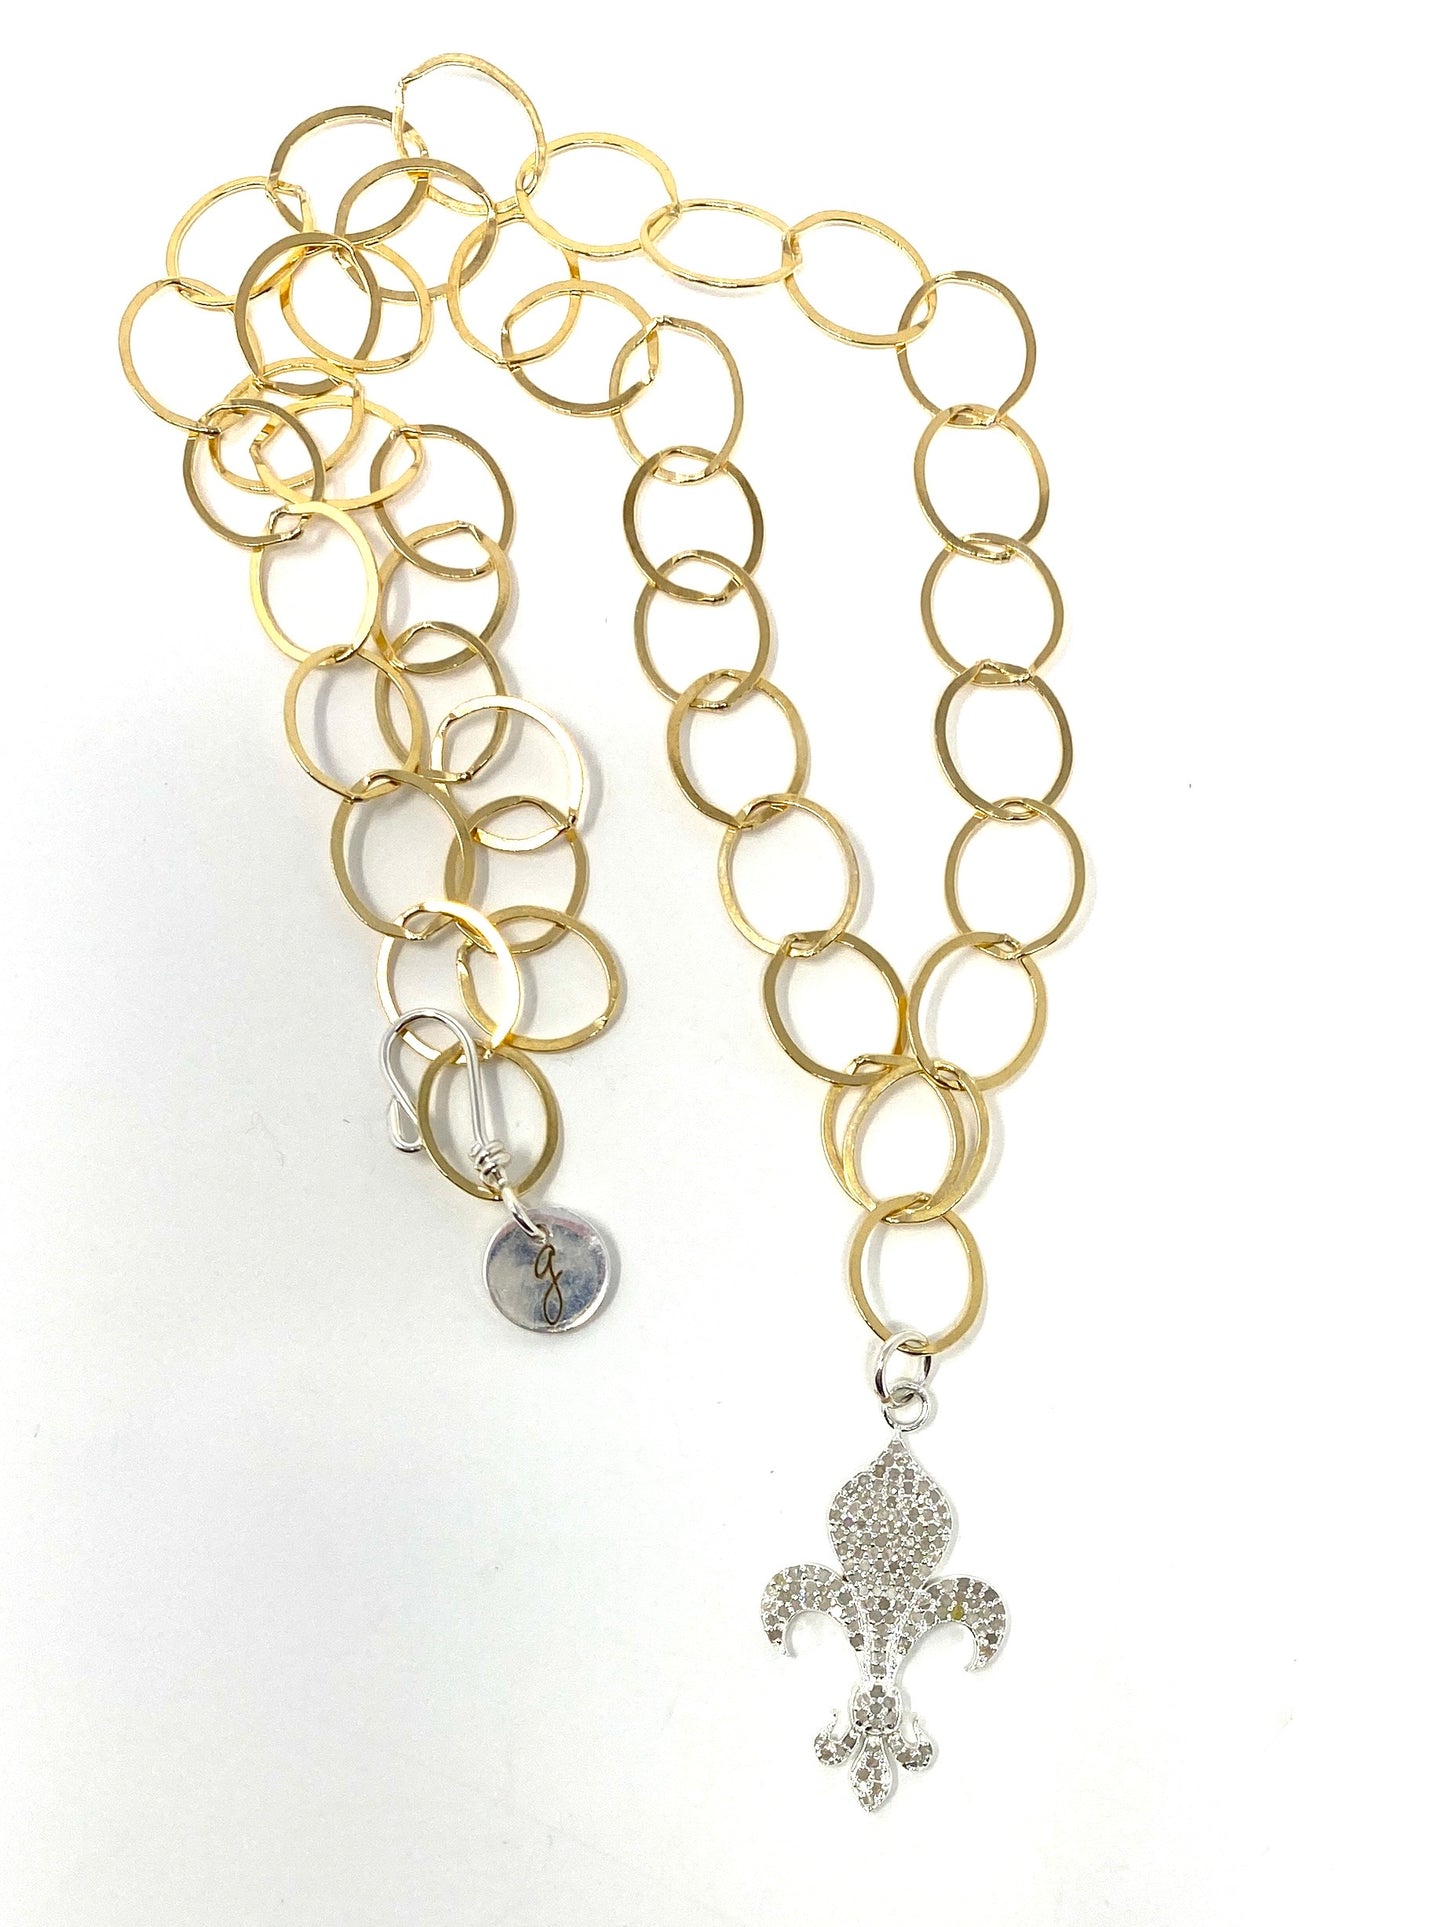 Gold Filled Link Necklace With Silver and Diamond Fleur-de-lis Pendant